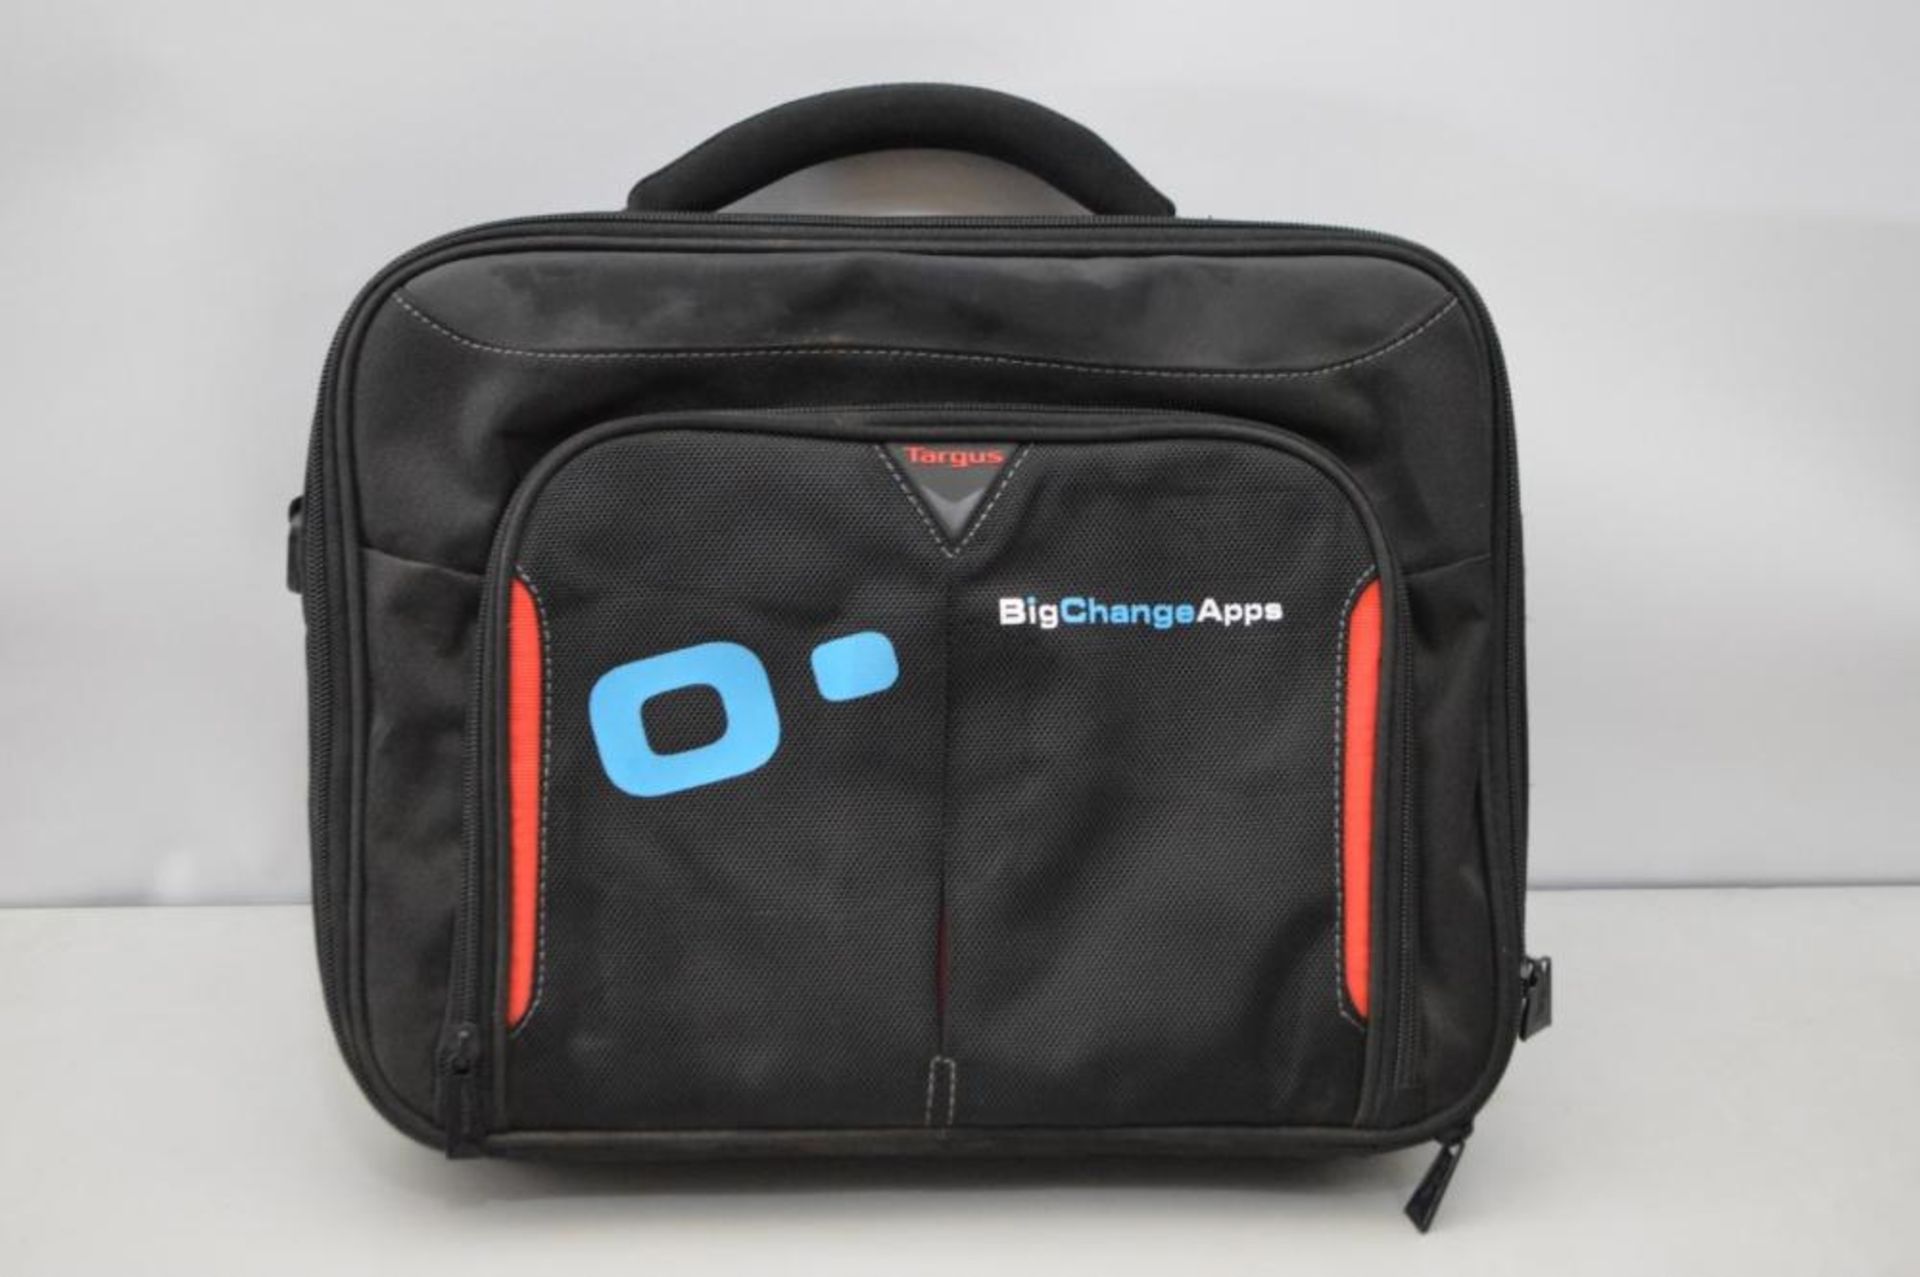 12 x Big Change Tablet Bags 16inchs - Ref TP394 - CL394 - Location: Altrincham WA14 - UP N A - Image 5 of 5